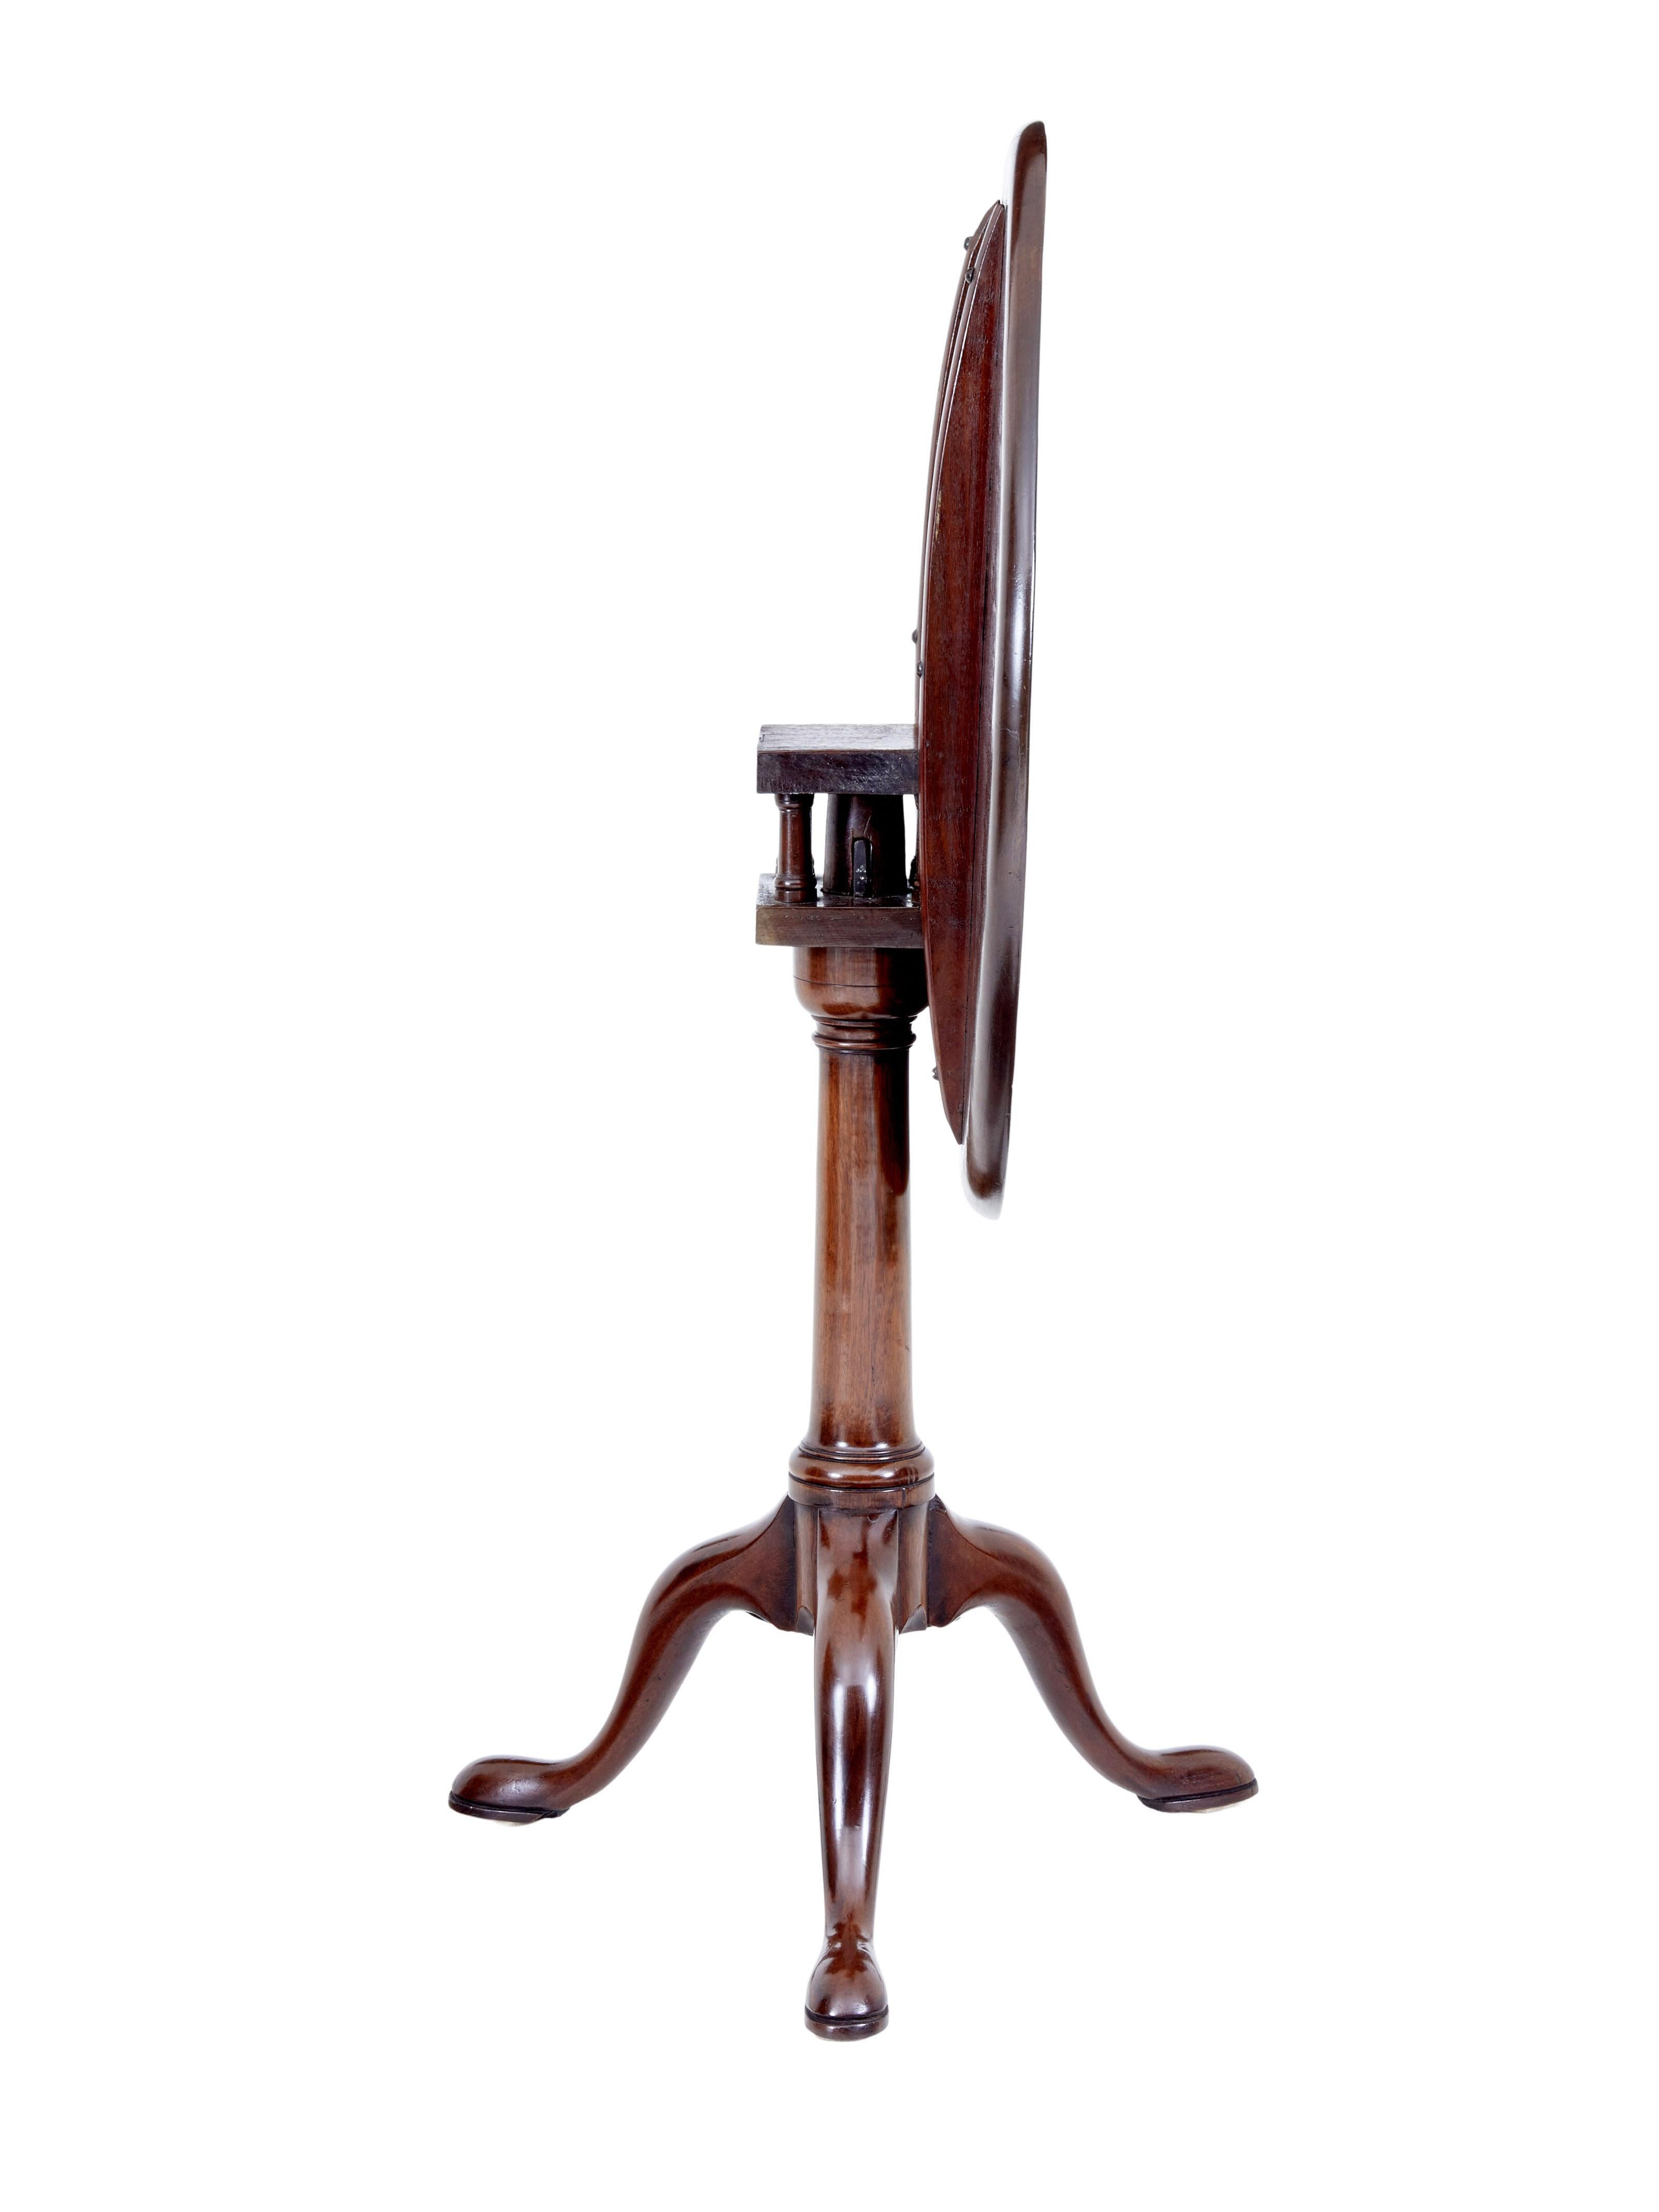 Early 19th century Georgian mahogany tripod table circa 1800.

Good quality late Georgian mahogany with circular dish top. Supported by bird cage spindles and a turned stem, standing of cabriole legs and pad foot. Tilts for easier storage when not